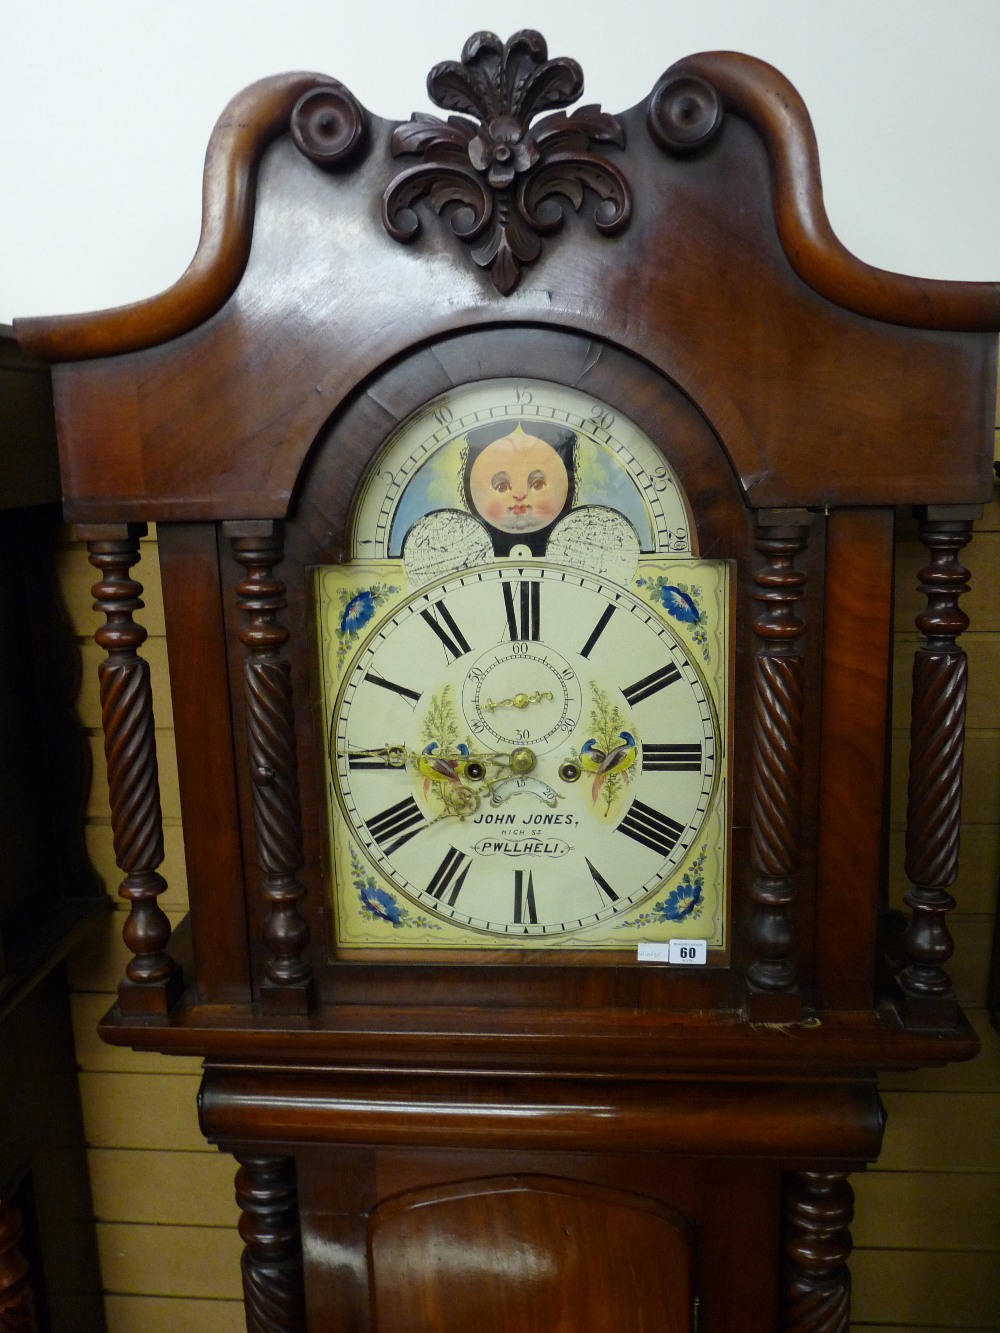 A LATE 19th CENTURY MAHOGANY ENCASED LONGCASE CLOCK, exceptionally well preserved throughout and